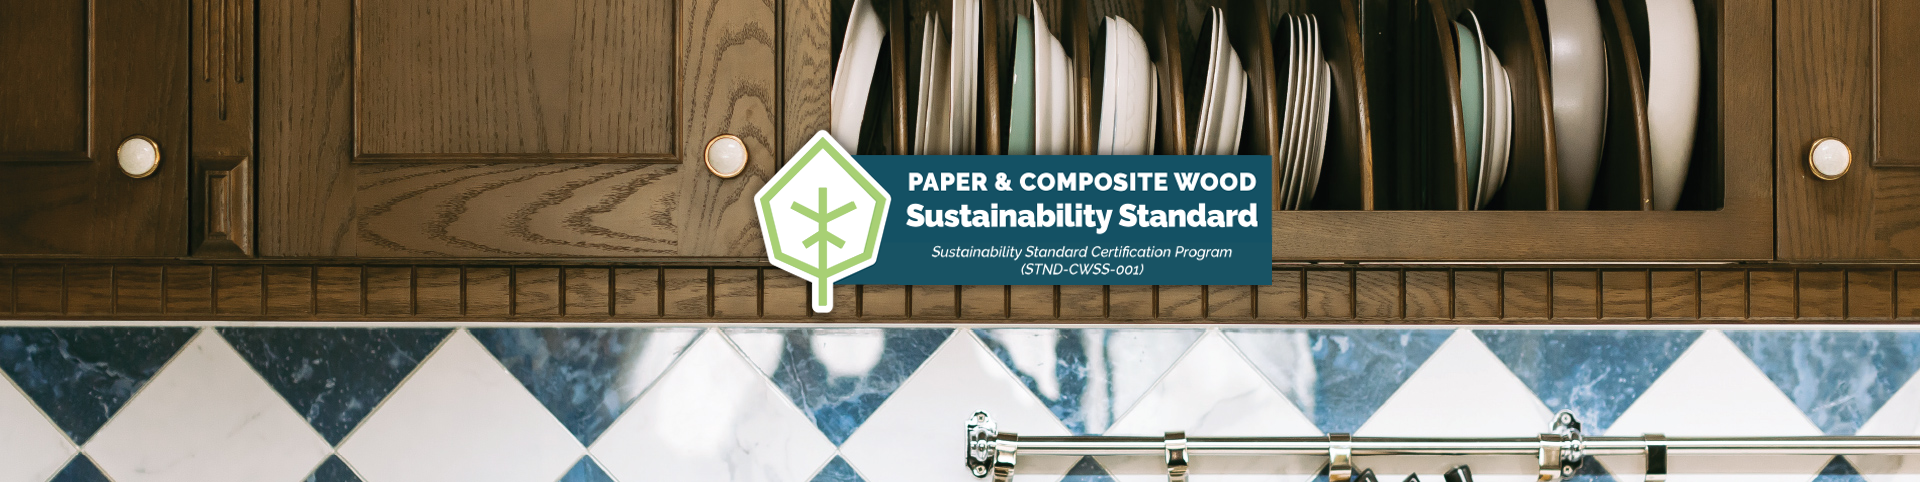 Paper & Composite Wood Sustainability Standard